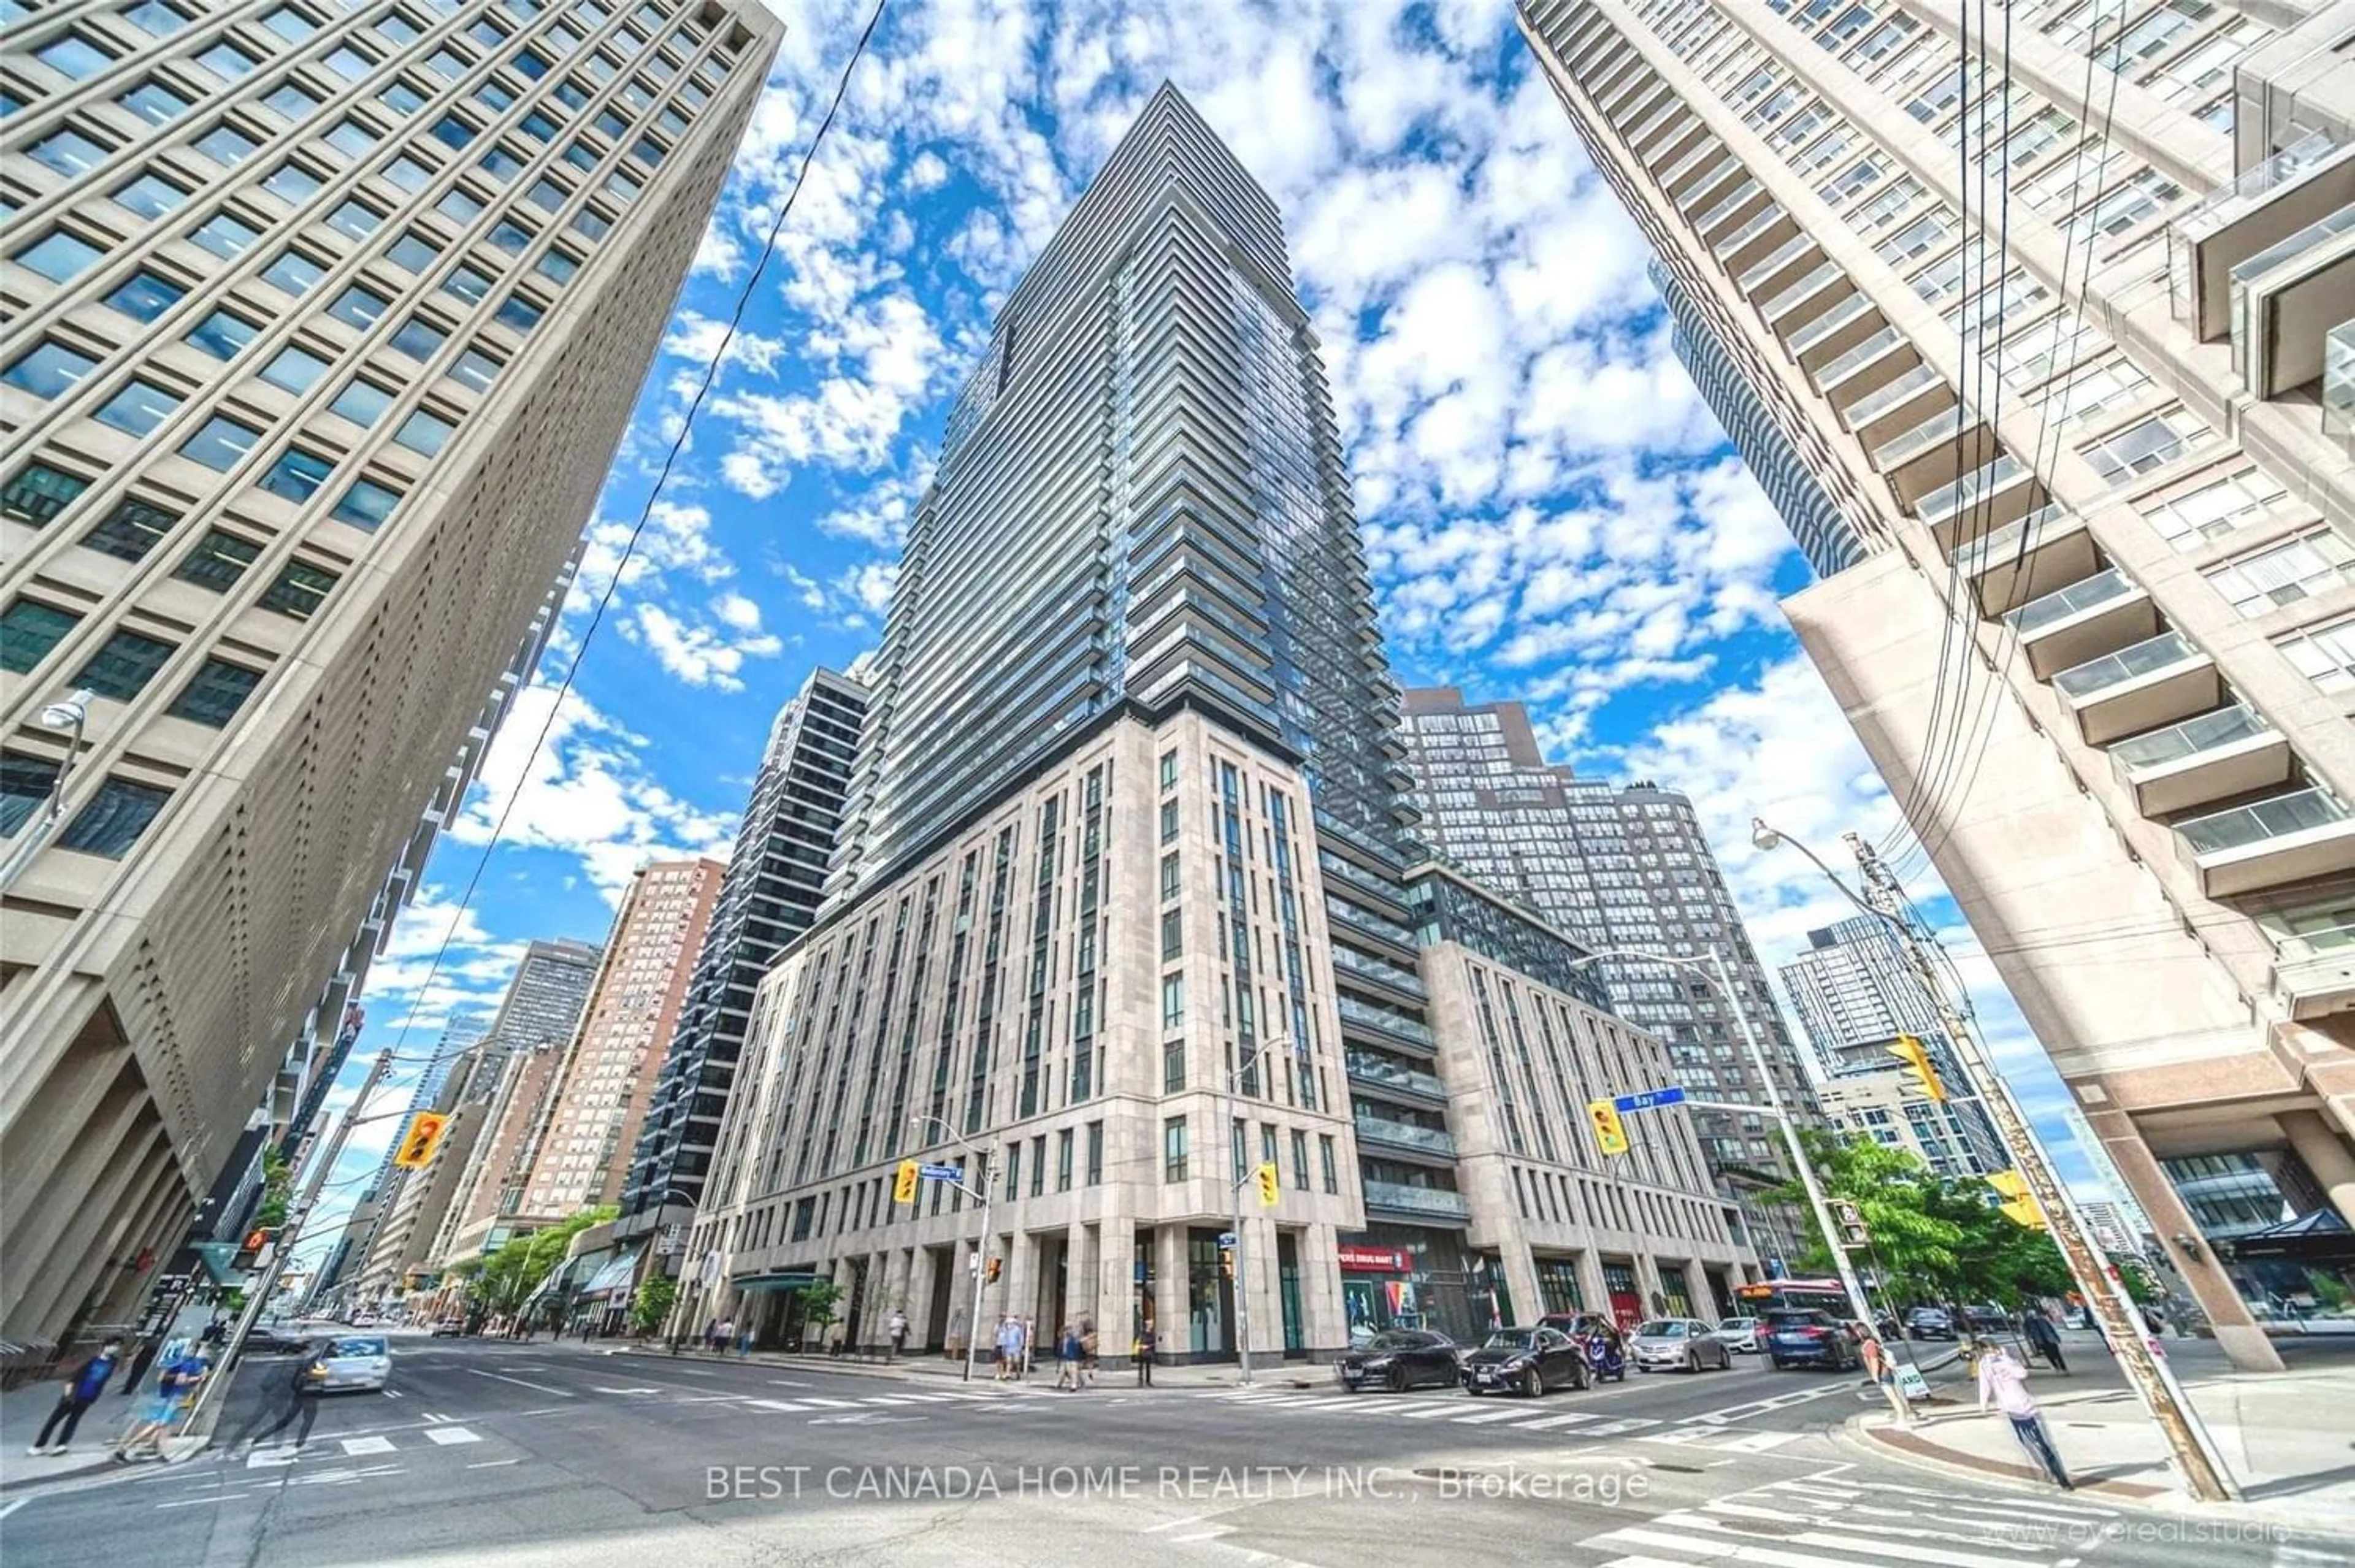 A pic from exterior of the house or condo for 955 Bay St #907, Toronto Ontario M5S 0C6